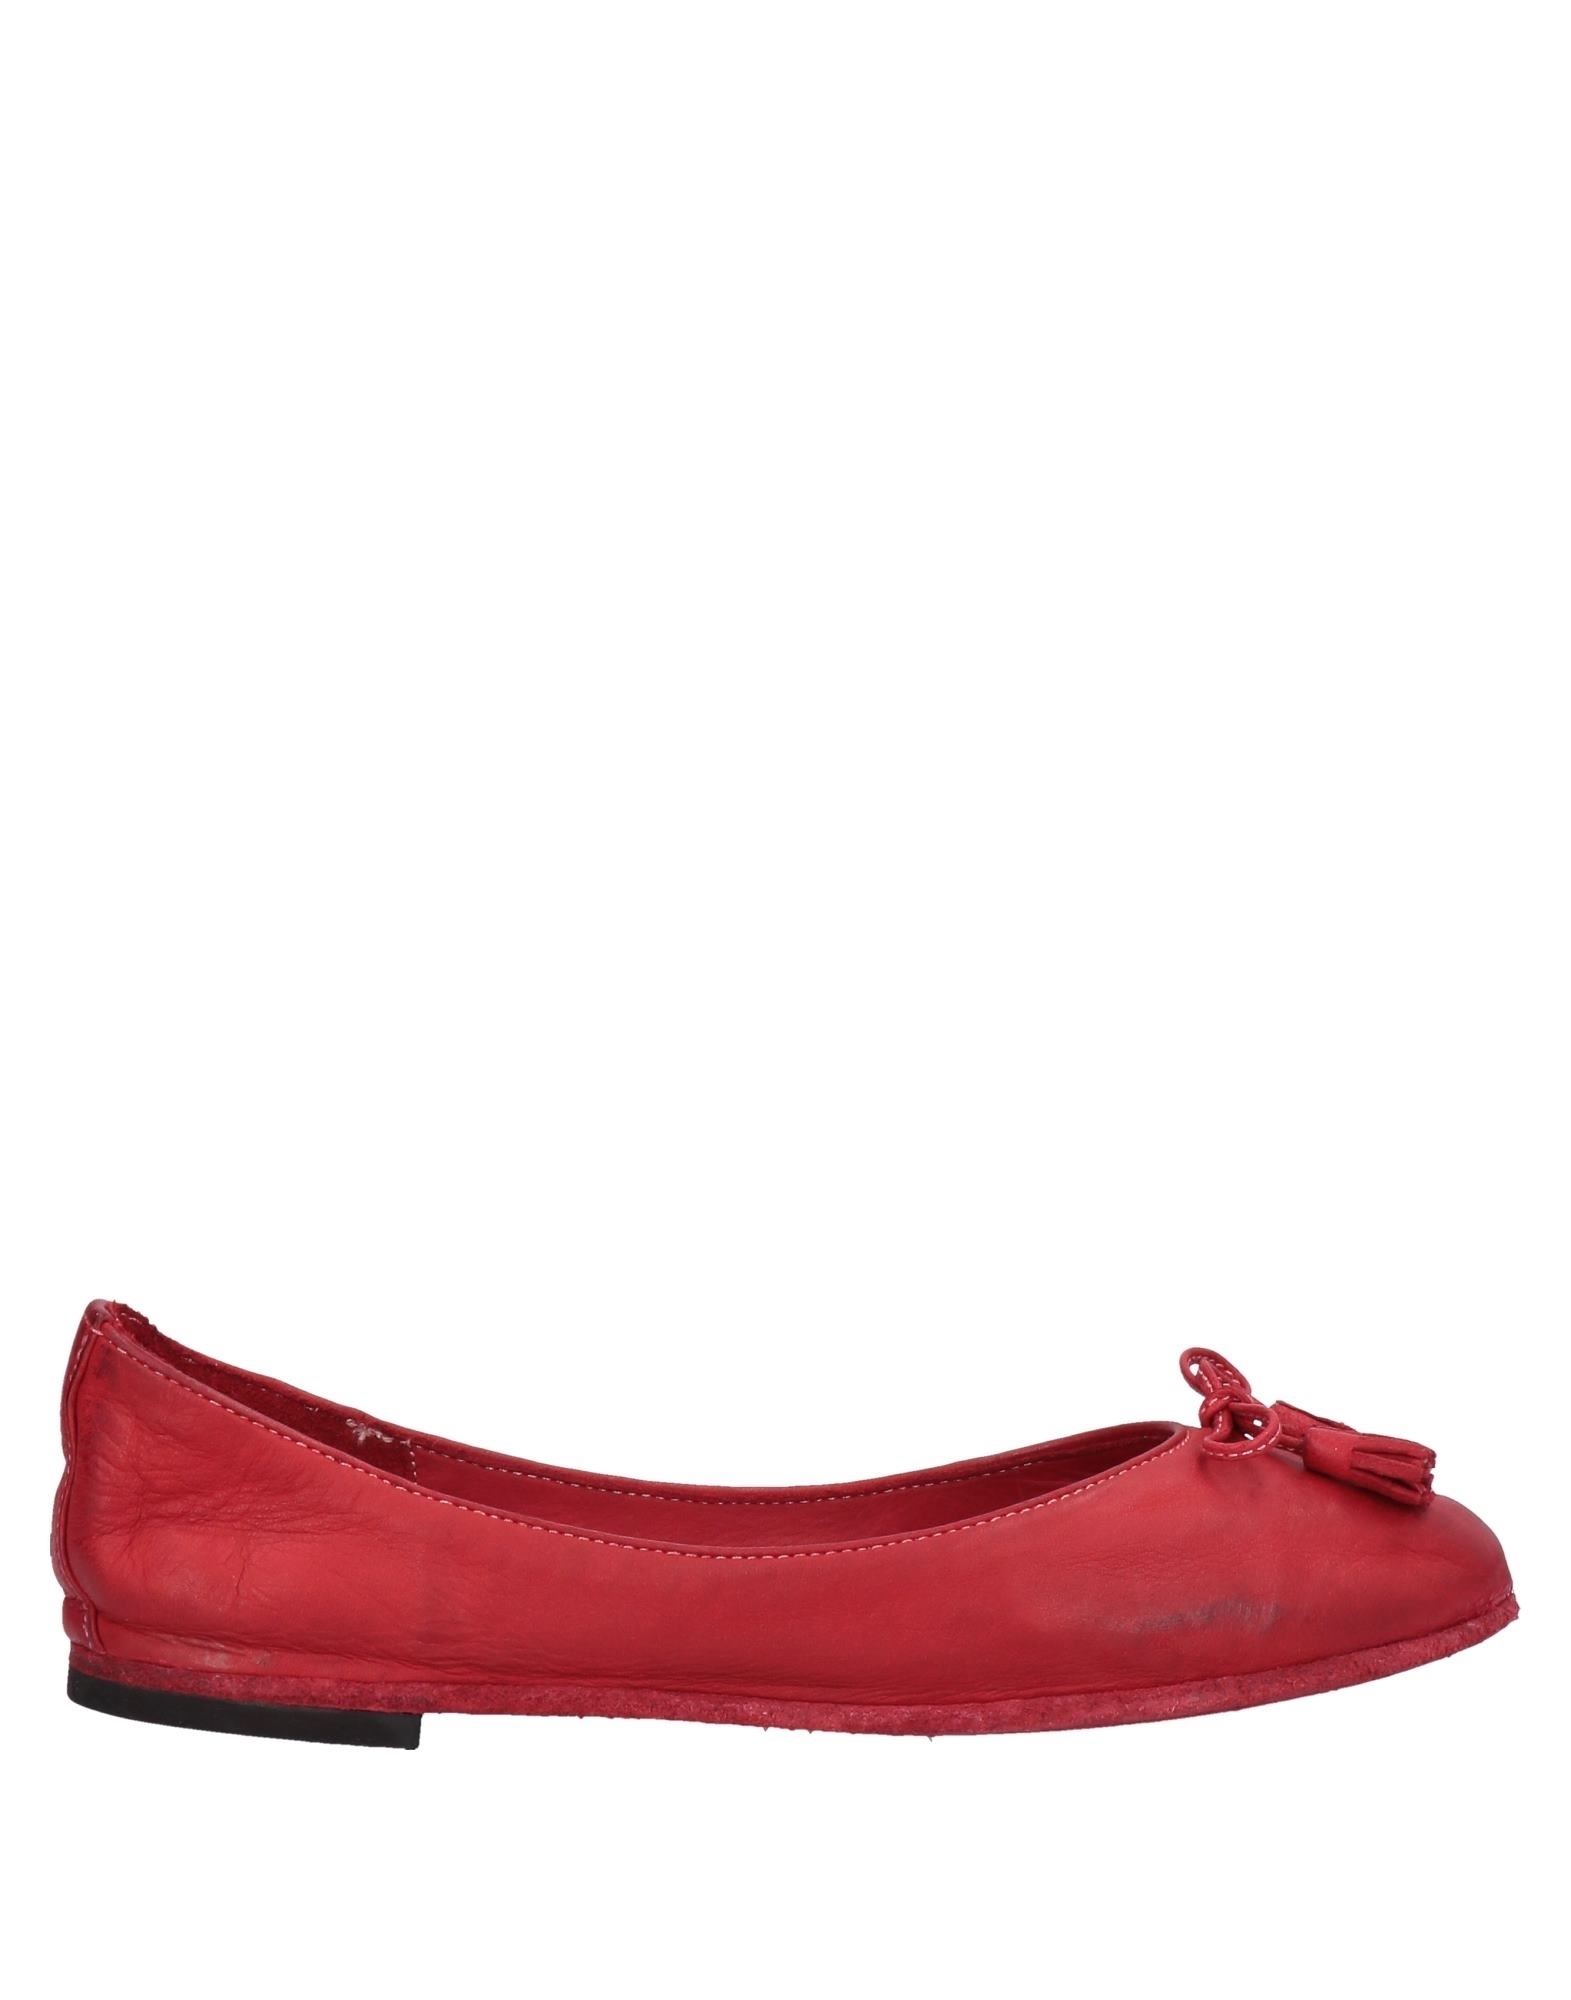 Pantofola D'oro Ballet Flats In Red